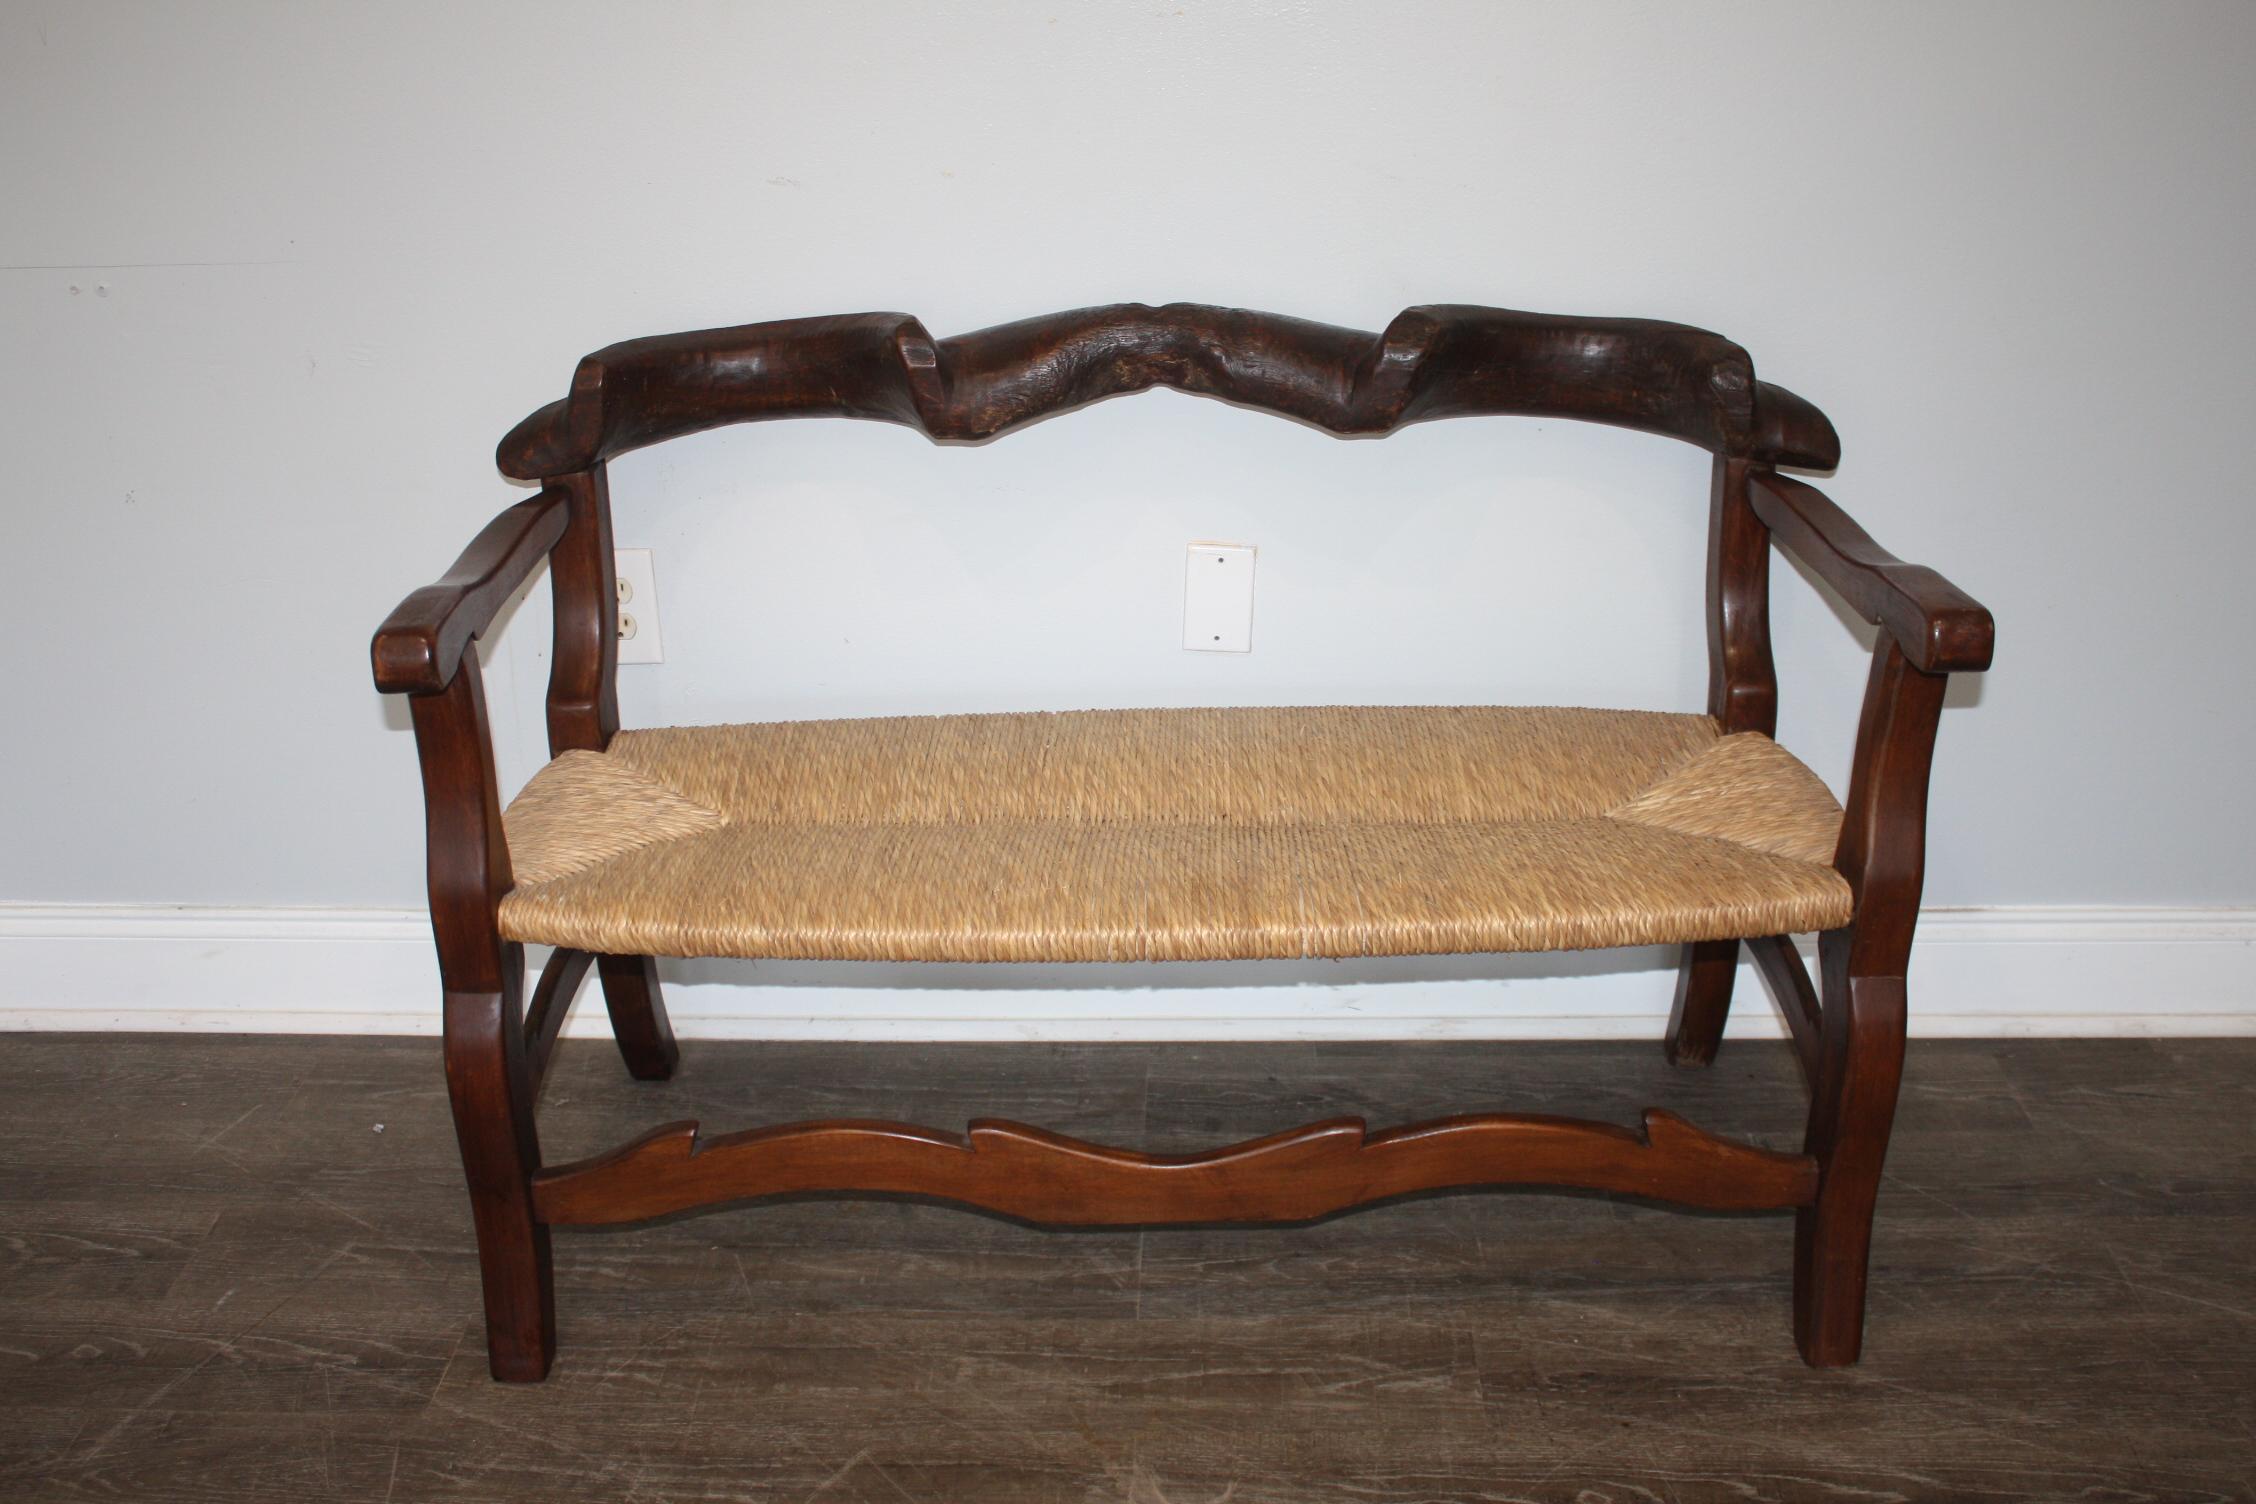 This settee has an amazing back made of strong wood, rustic look and so different.